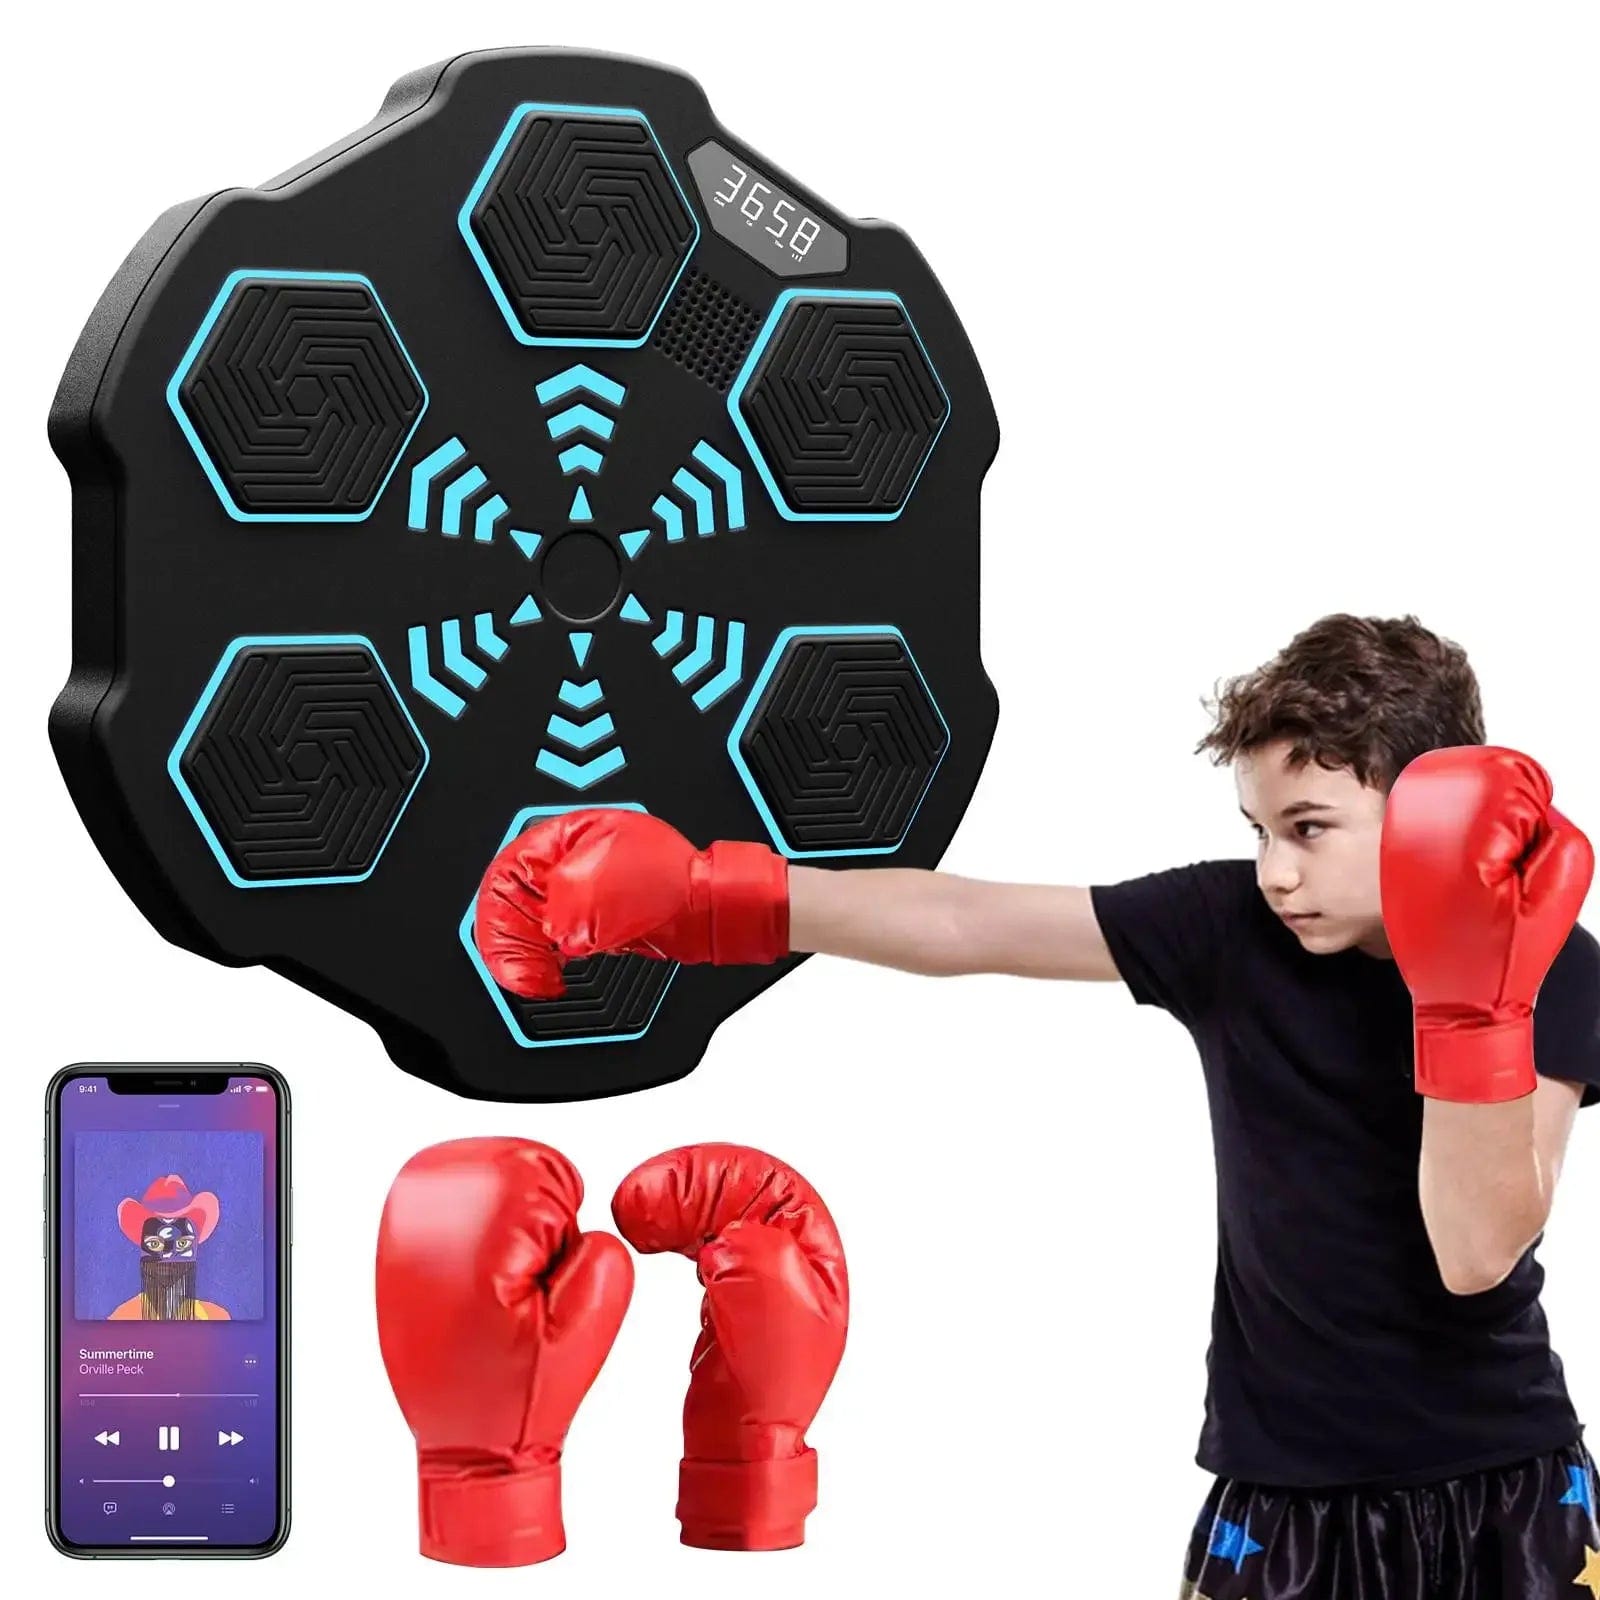 HomeBound Essentials with kids gloves RhythmStrike: LED Music Boxing Machine with Gloves